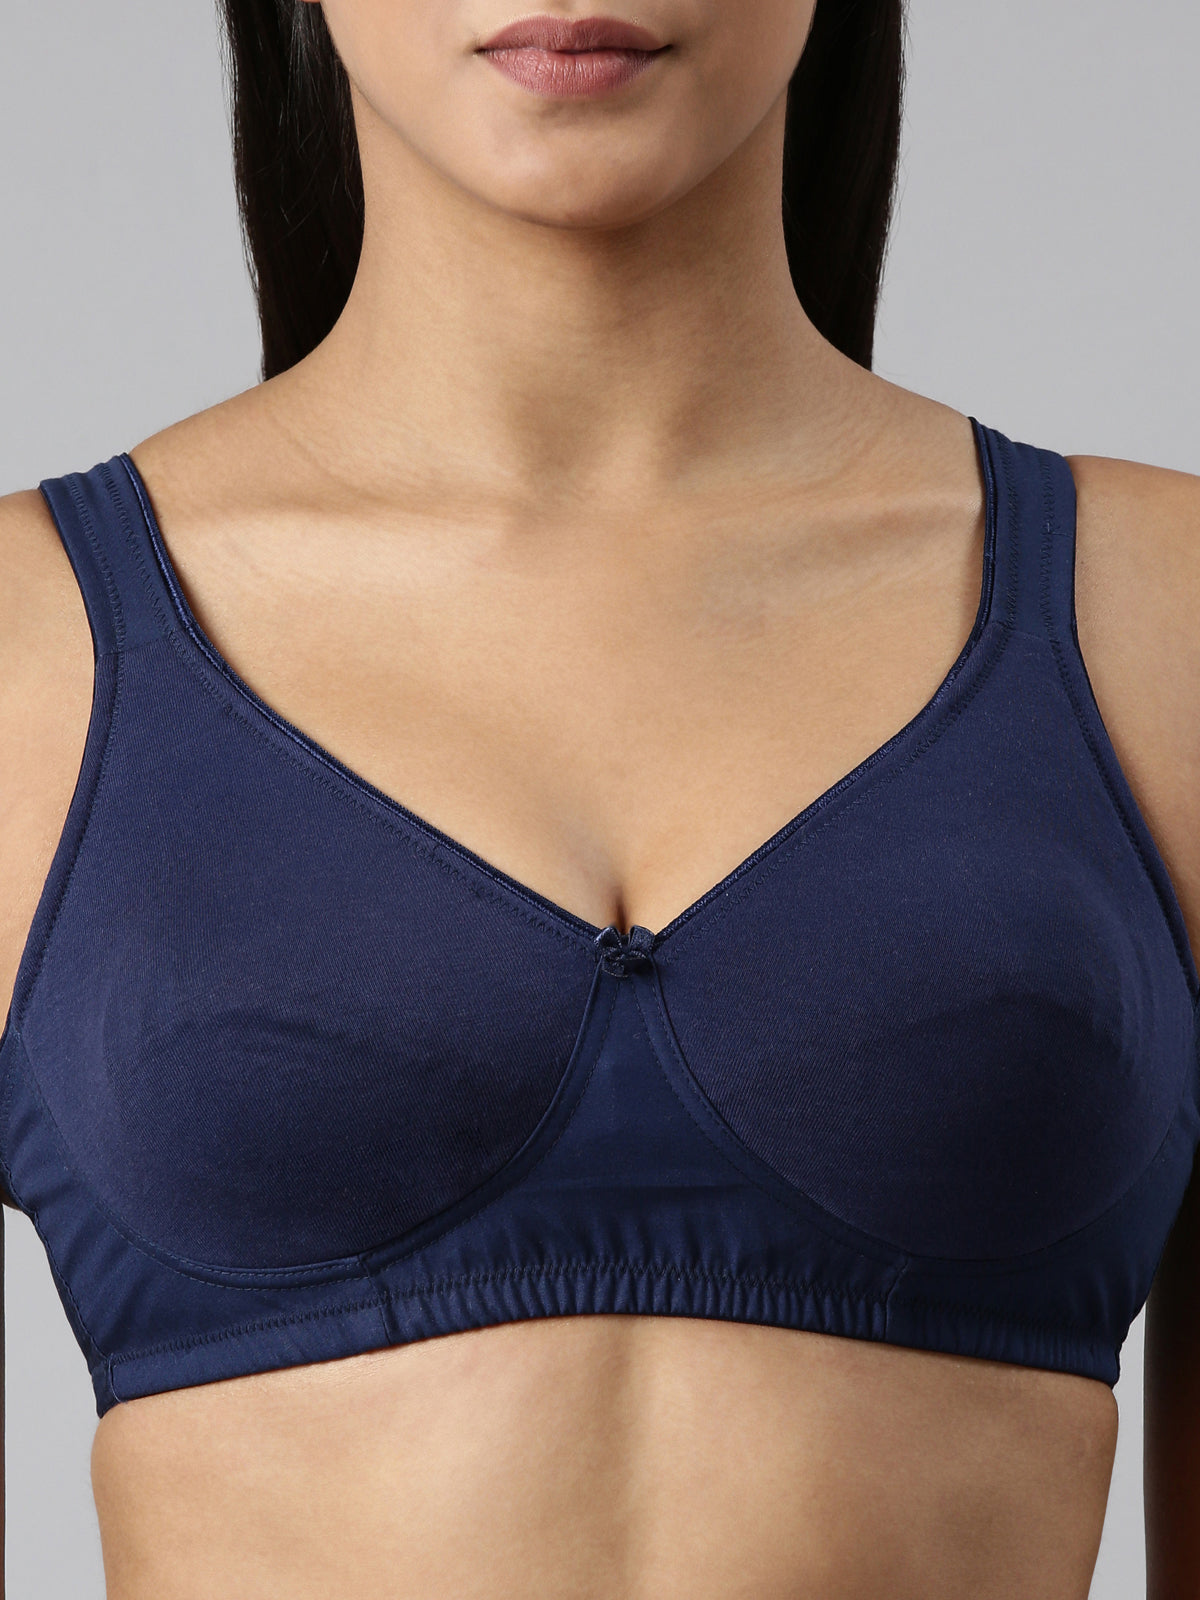 blossom-circlet-navy blue1-woven knitted-support bra